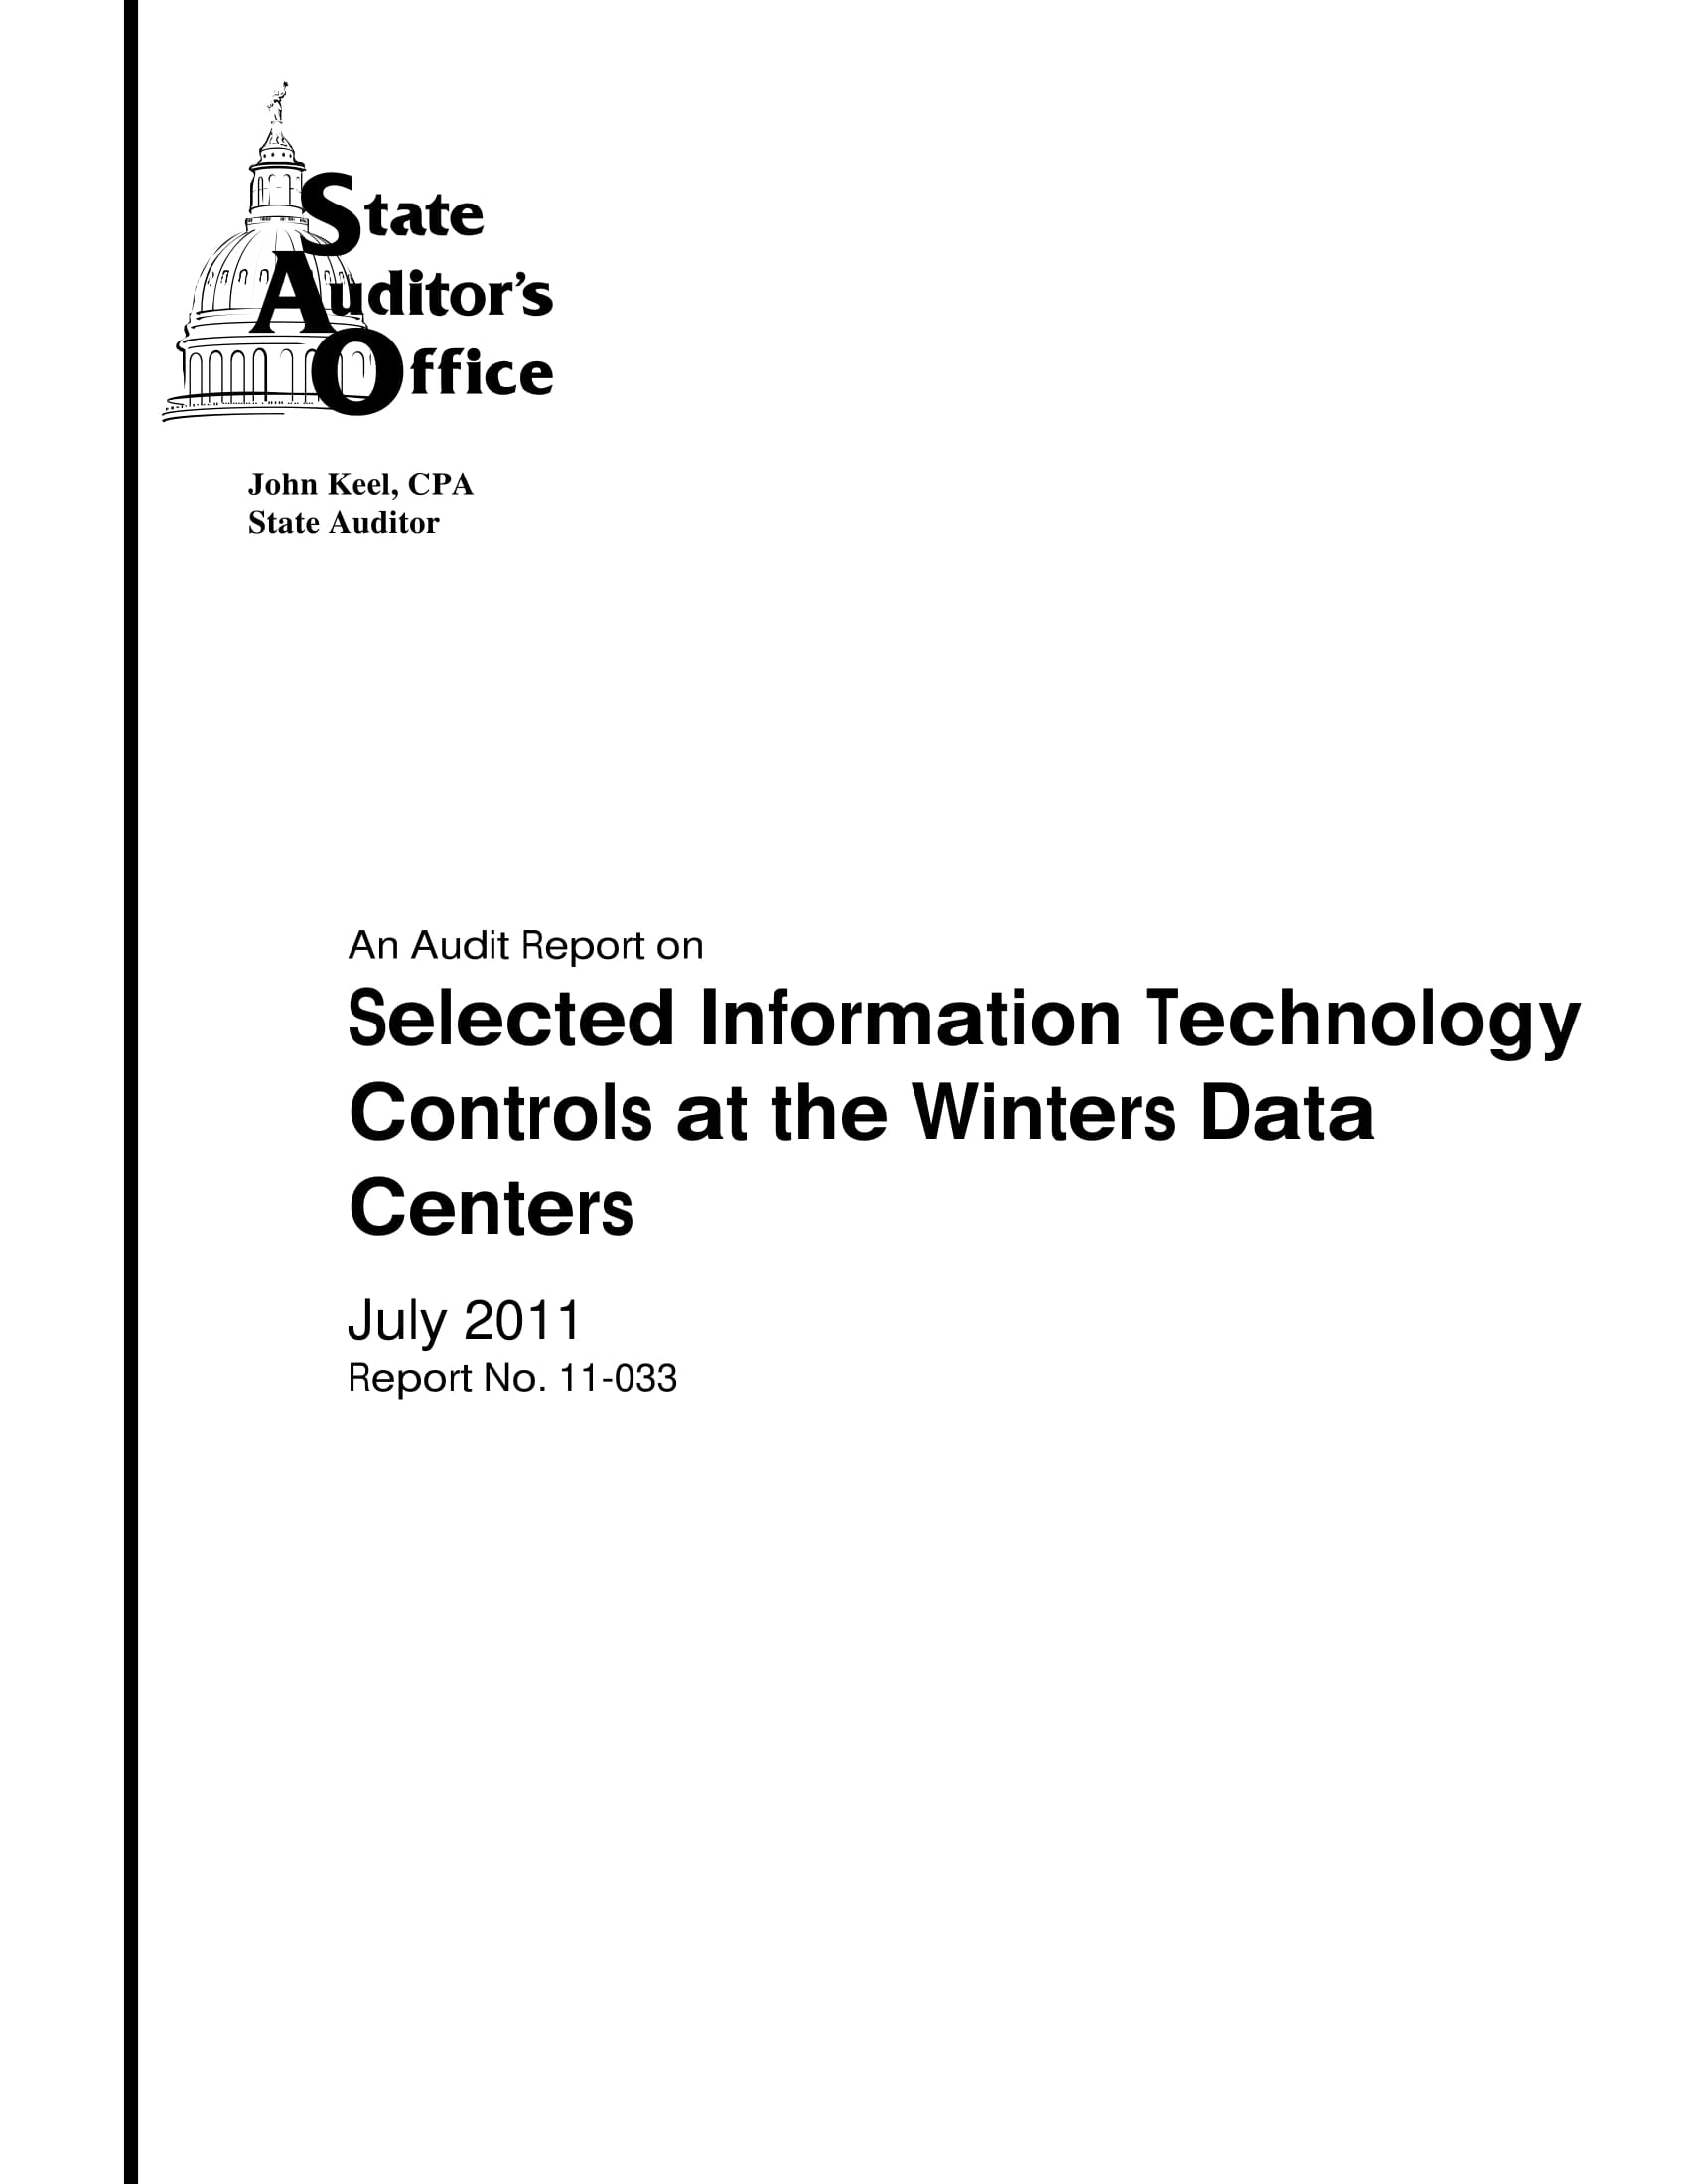 selected information technology controls and management systems report example 01